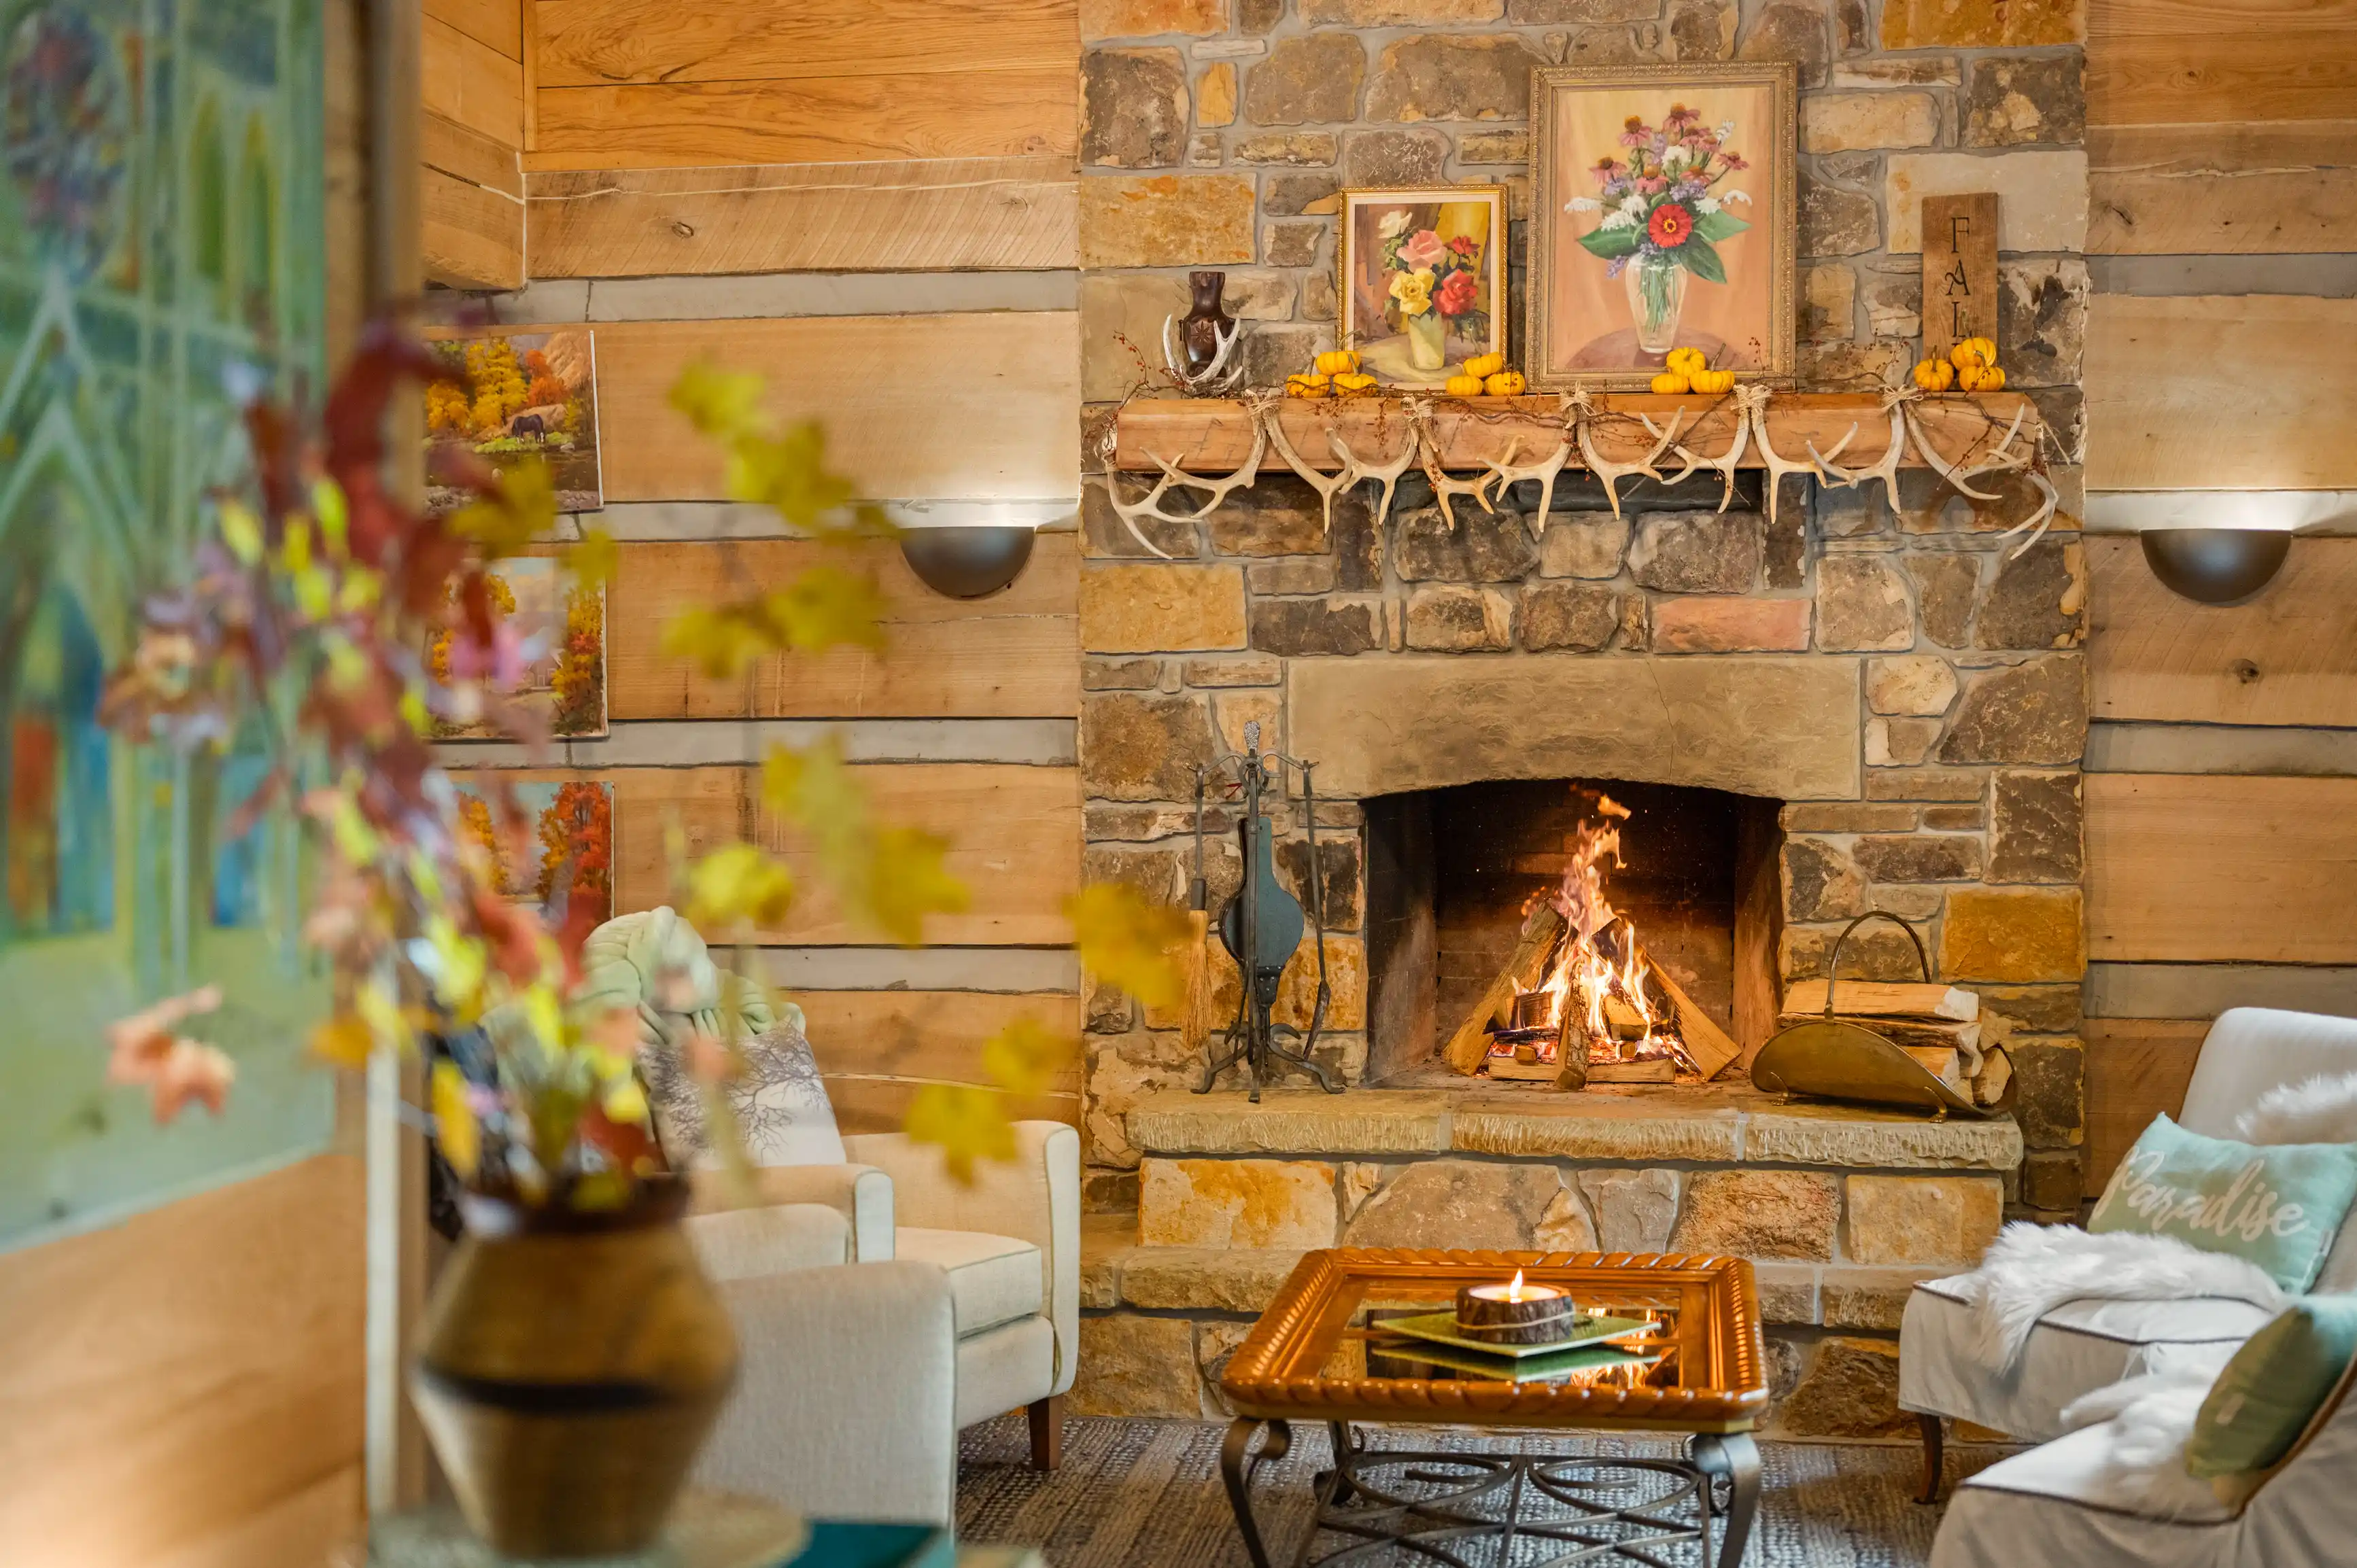 Cozy rustic living room interior with a lit fireplace, decorative mantle, wooden walls, and comfortable seating.